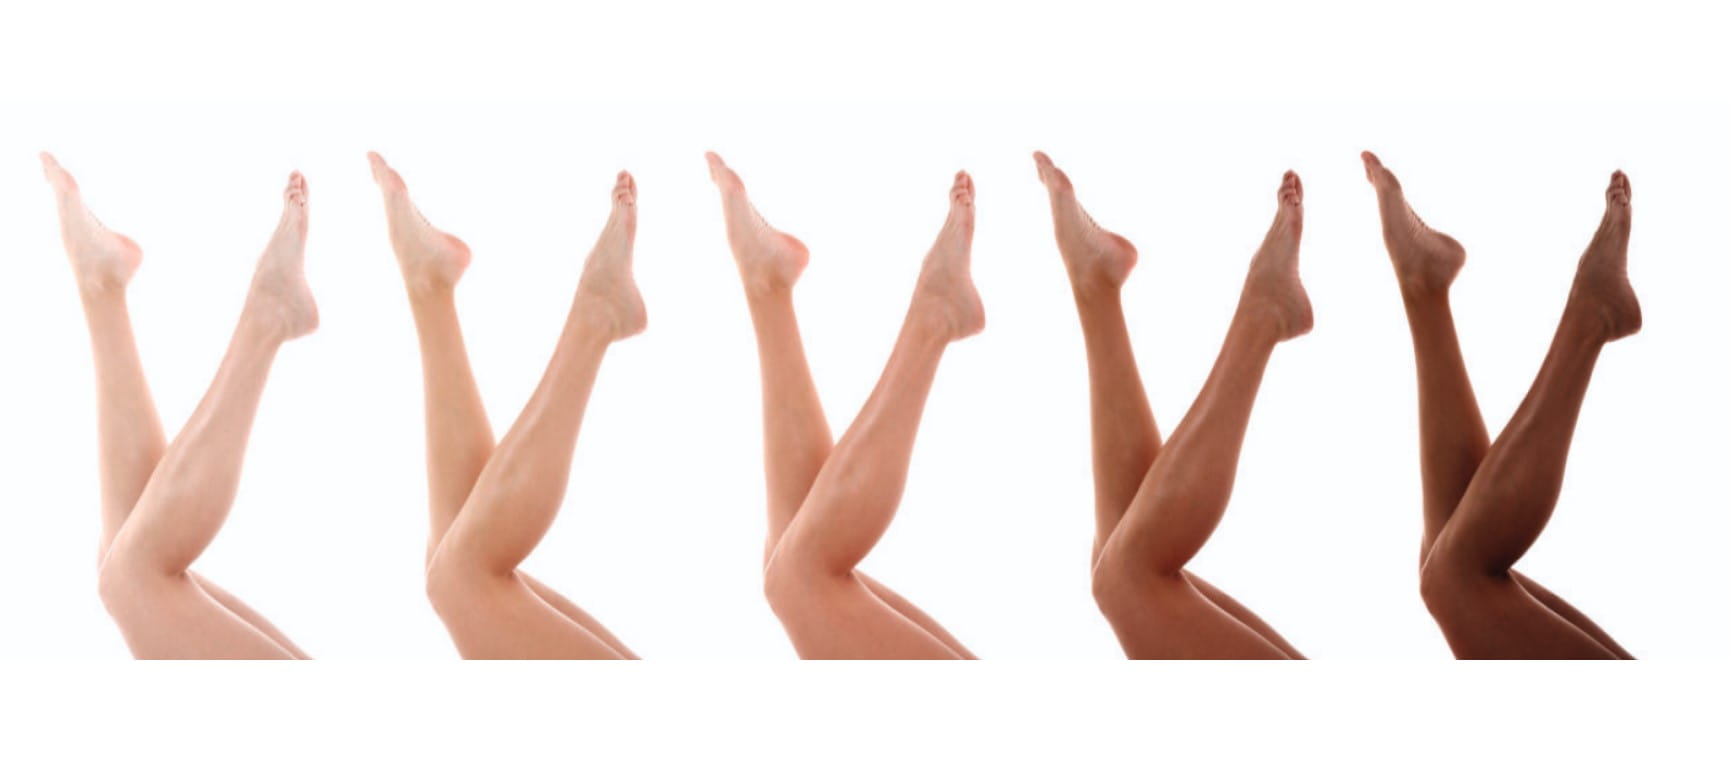 Five pair of legs in shades from very pale to very dark | Shutterstock